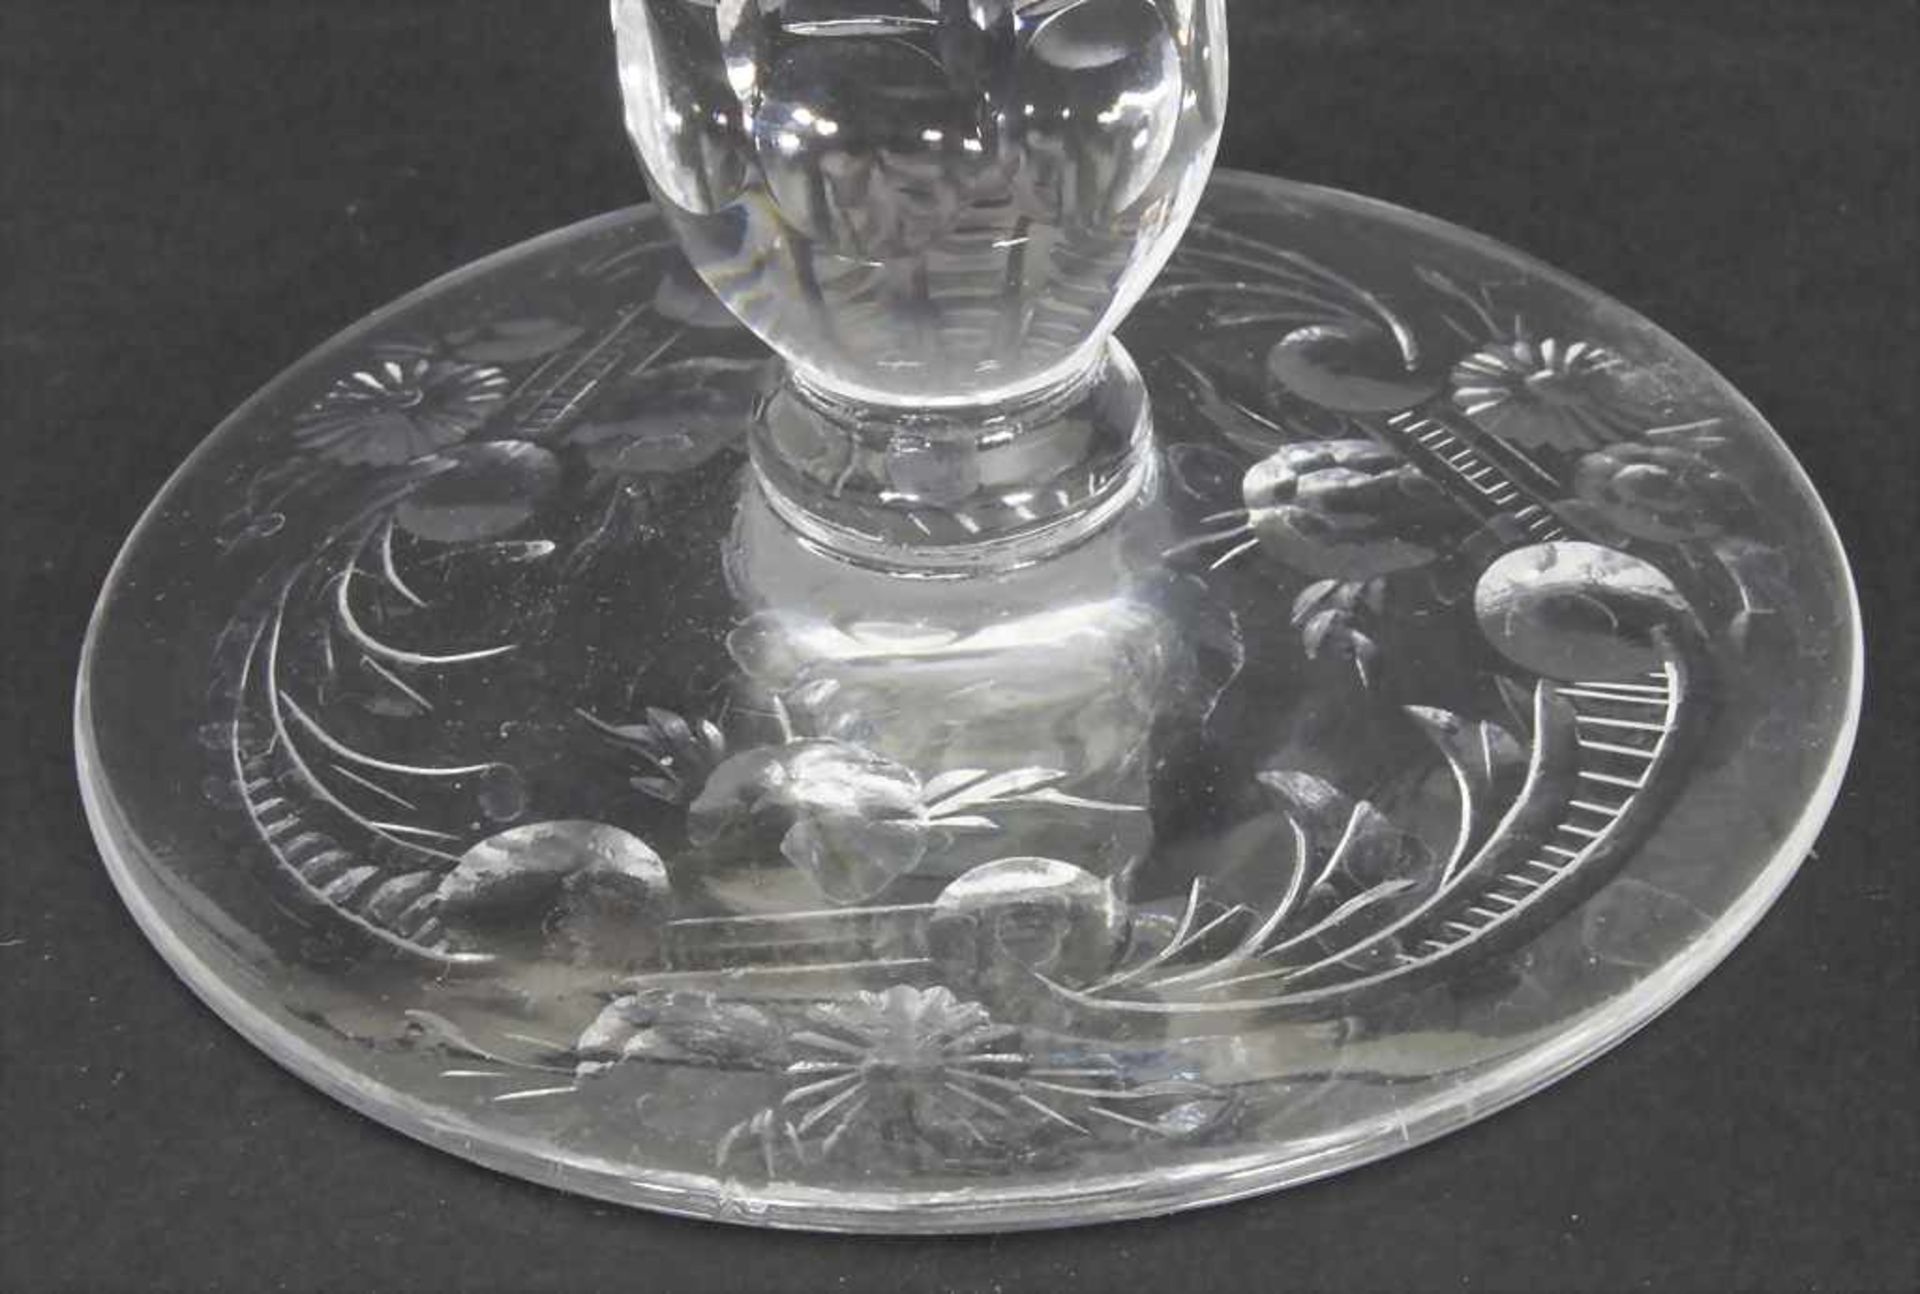 Weinglas / A wine glass, Frankreich, 19. Jh.Material: farbloses Glas, geschliffen,Höhe: 20,5 cm, - Image 6 of 6